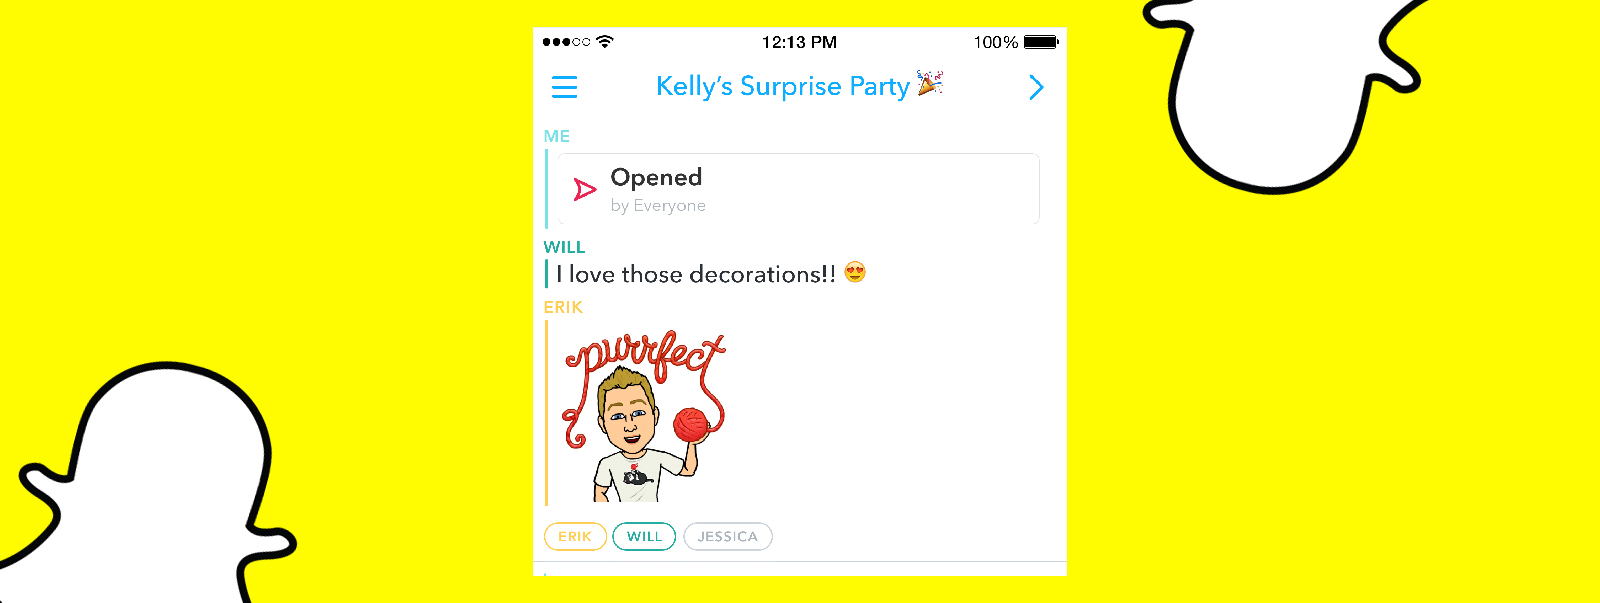 Snapchat introduces Groups with up to 21 people, plus new creative